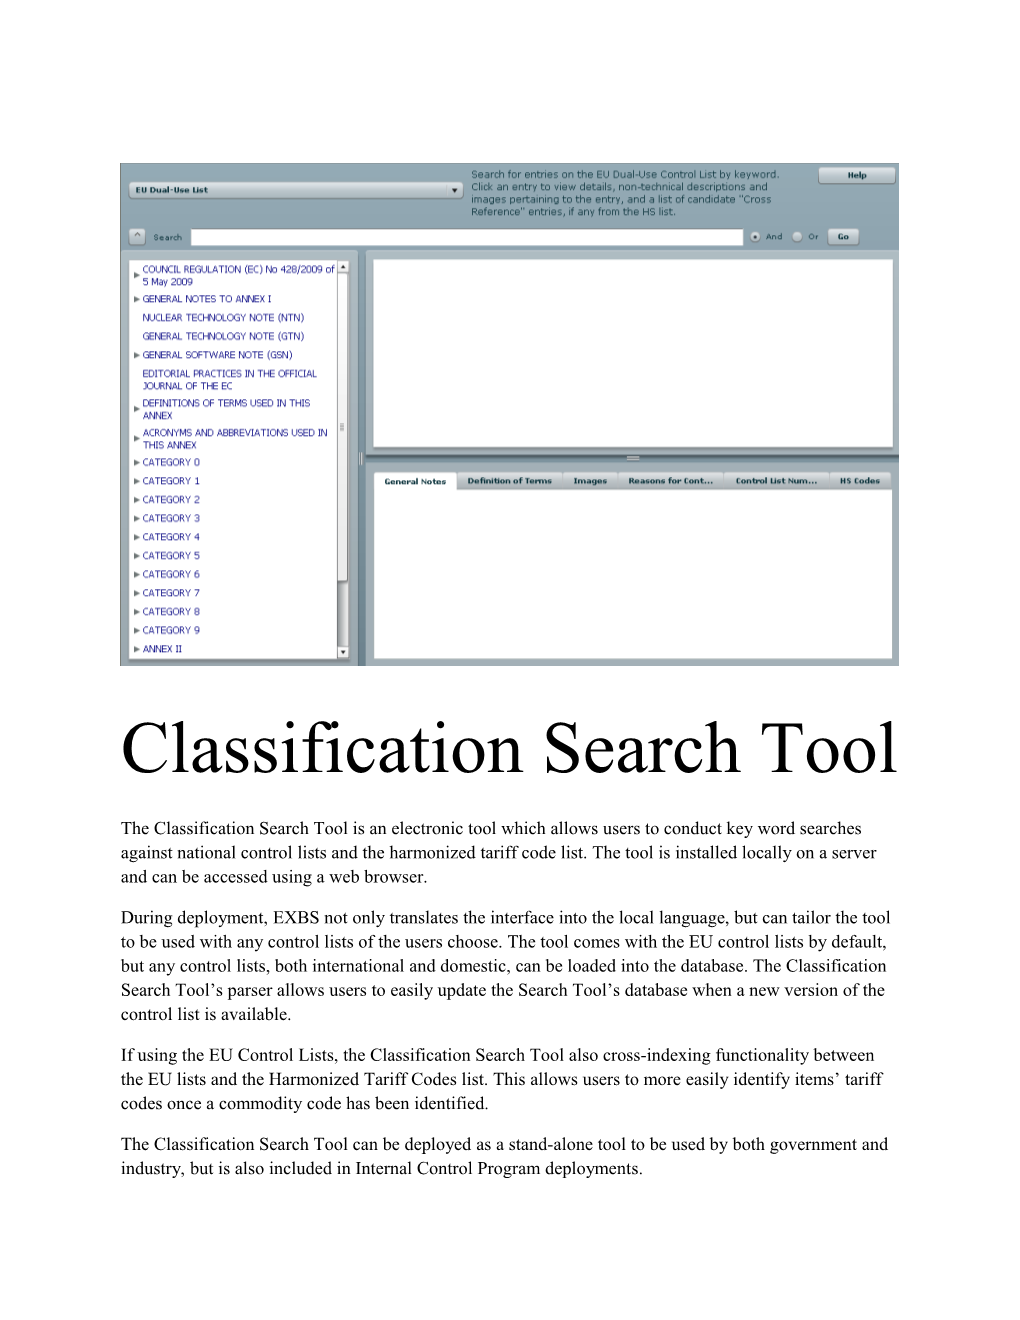 Classification Search Tool